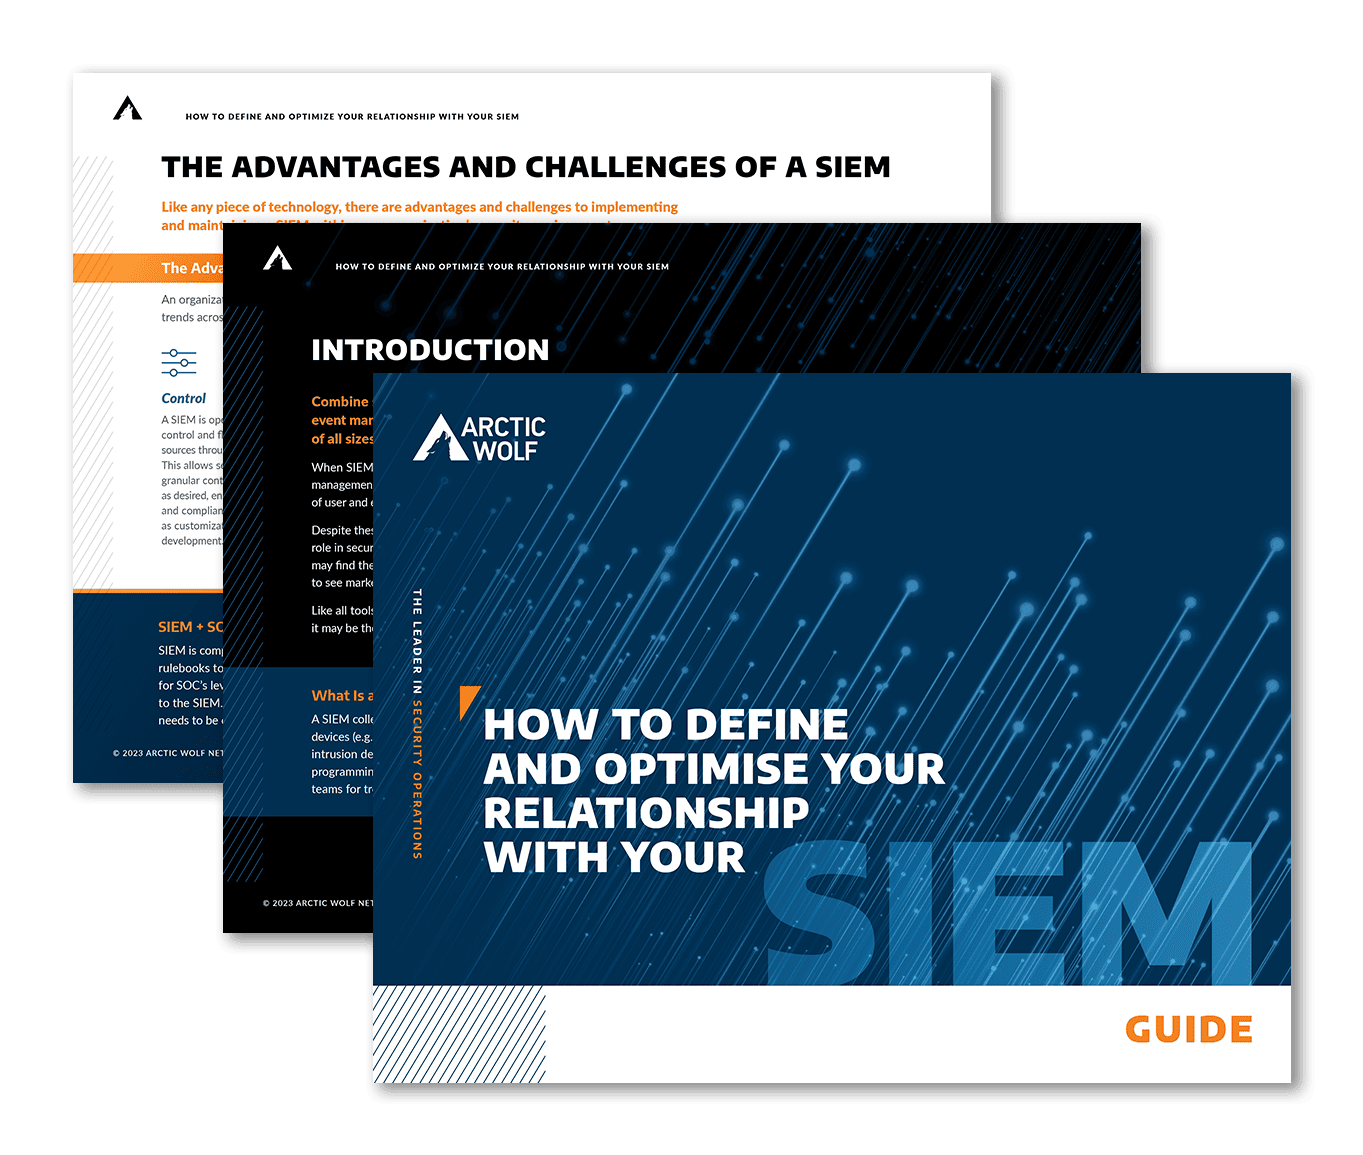 How To Define and Optimise Your Relationship With Your SIEM